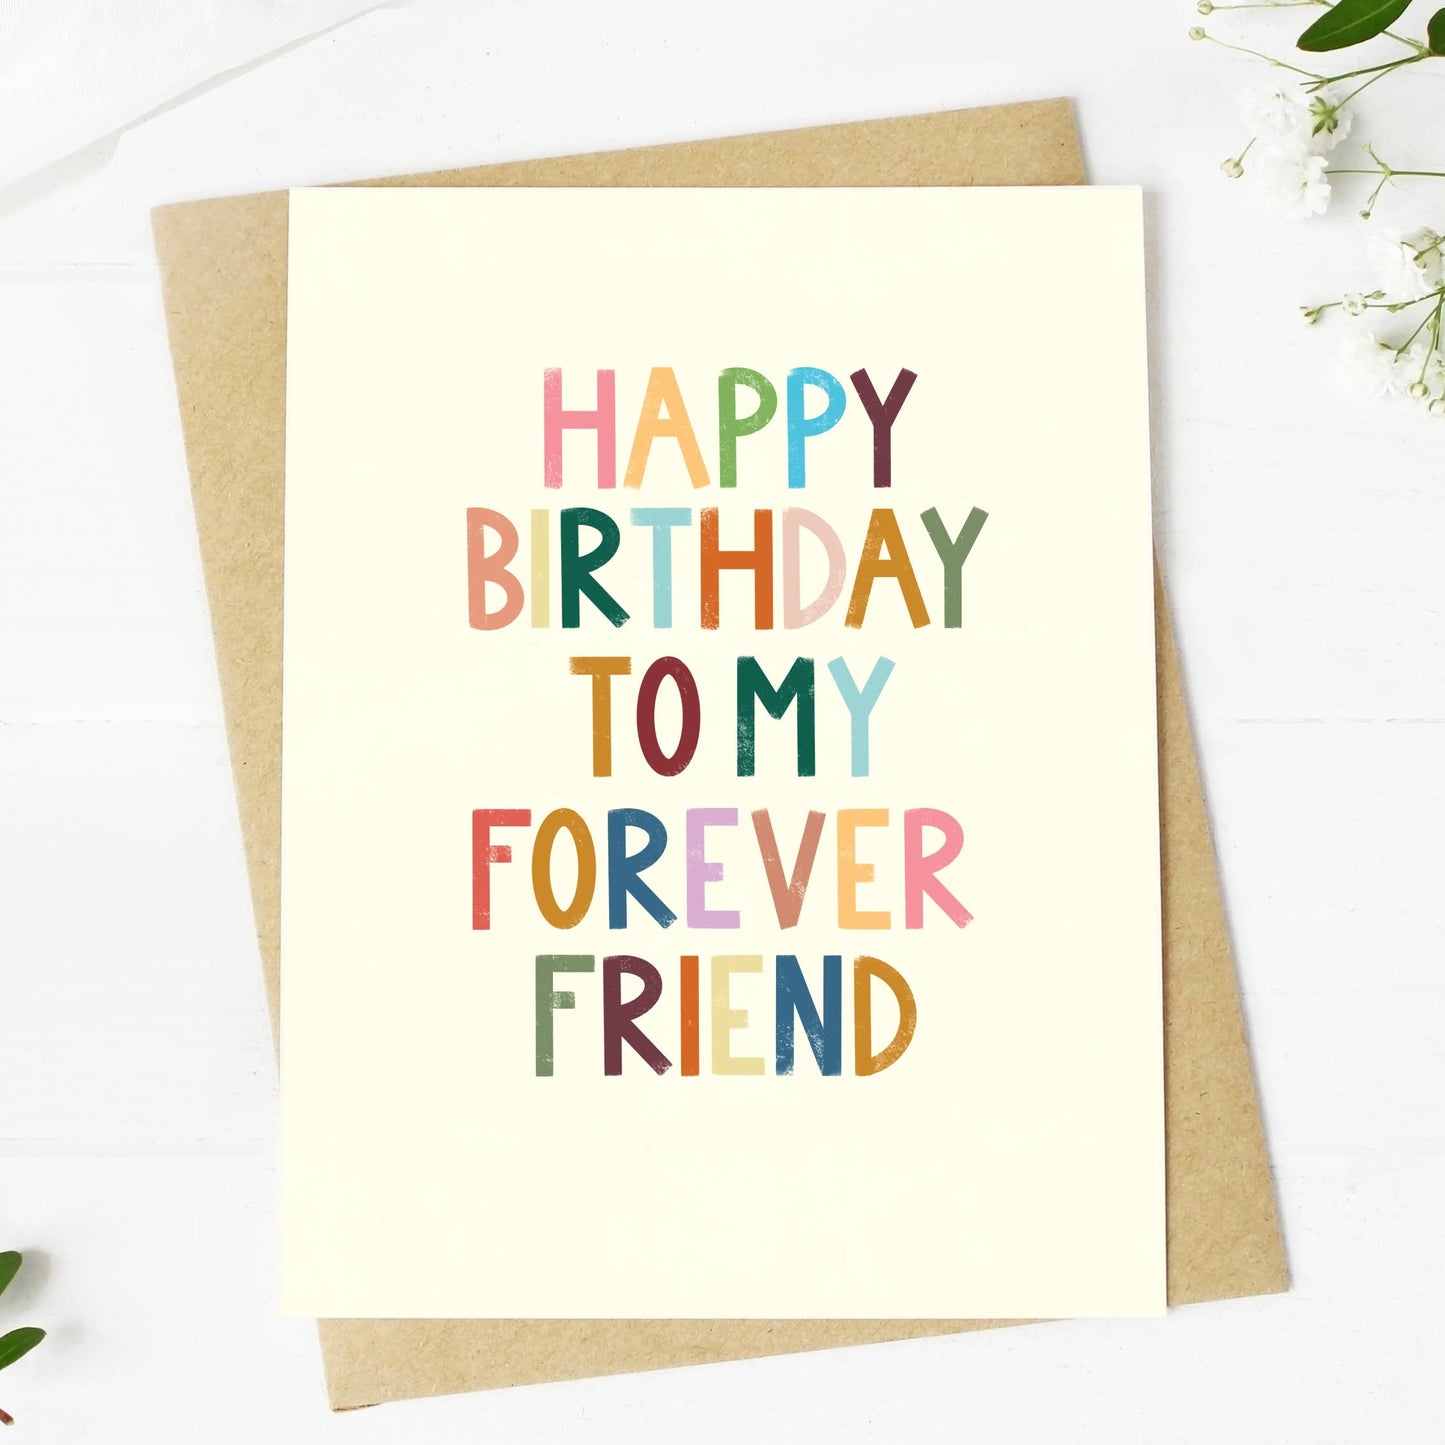 Big Moods - "Happy Birthday To My Forever Friend" Greeting Card